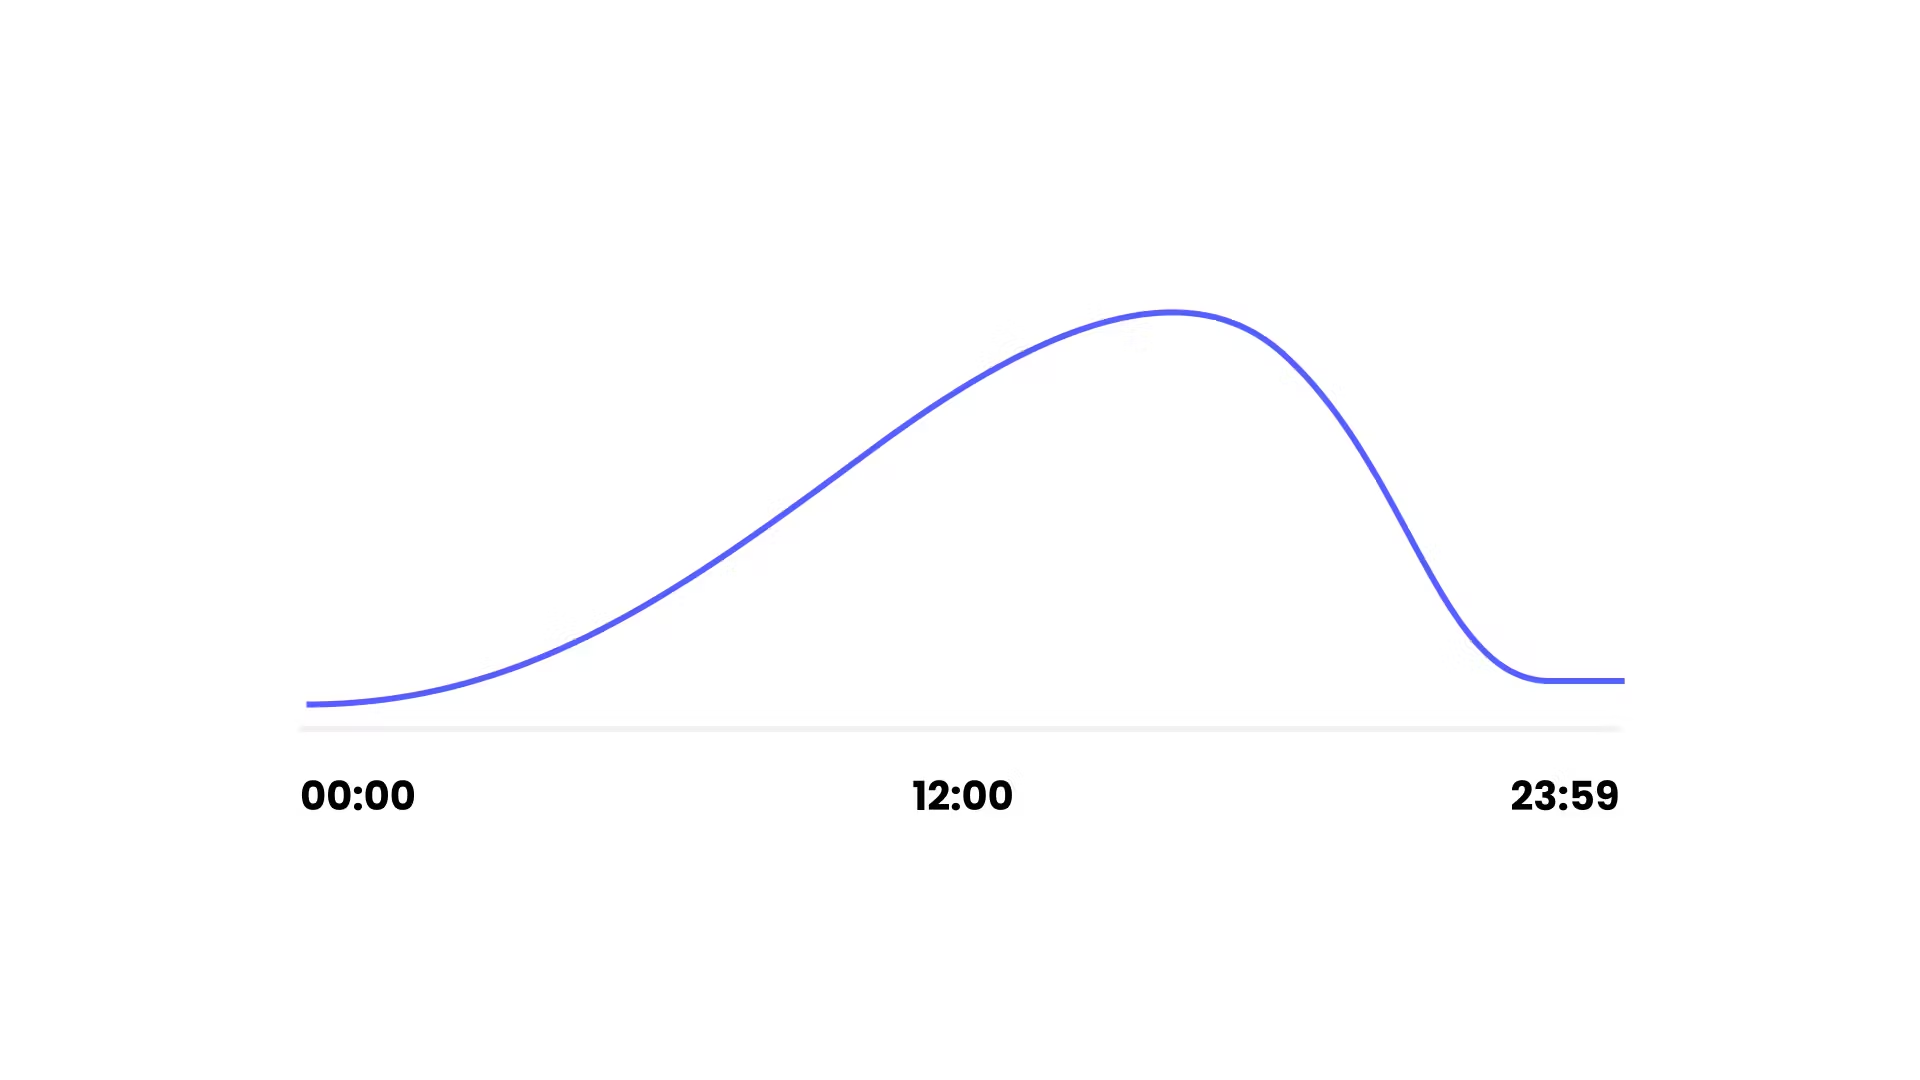 Sign up time curve